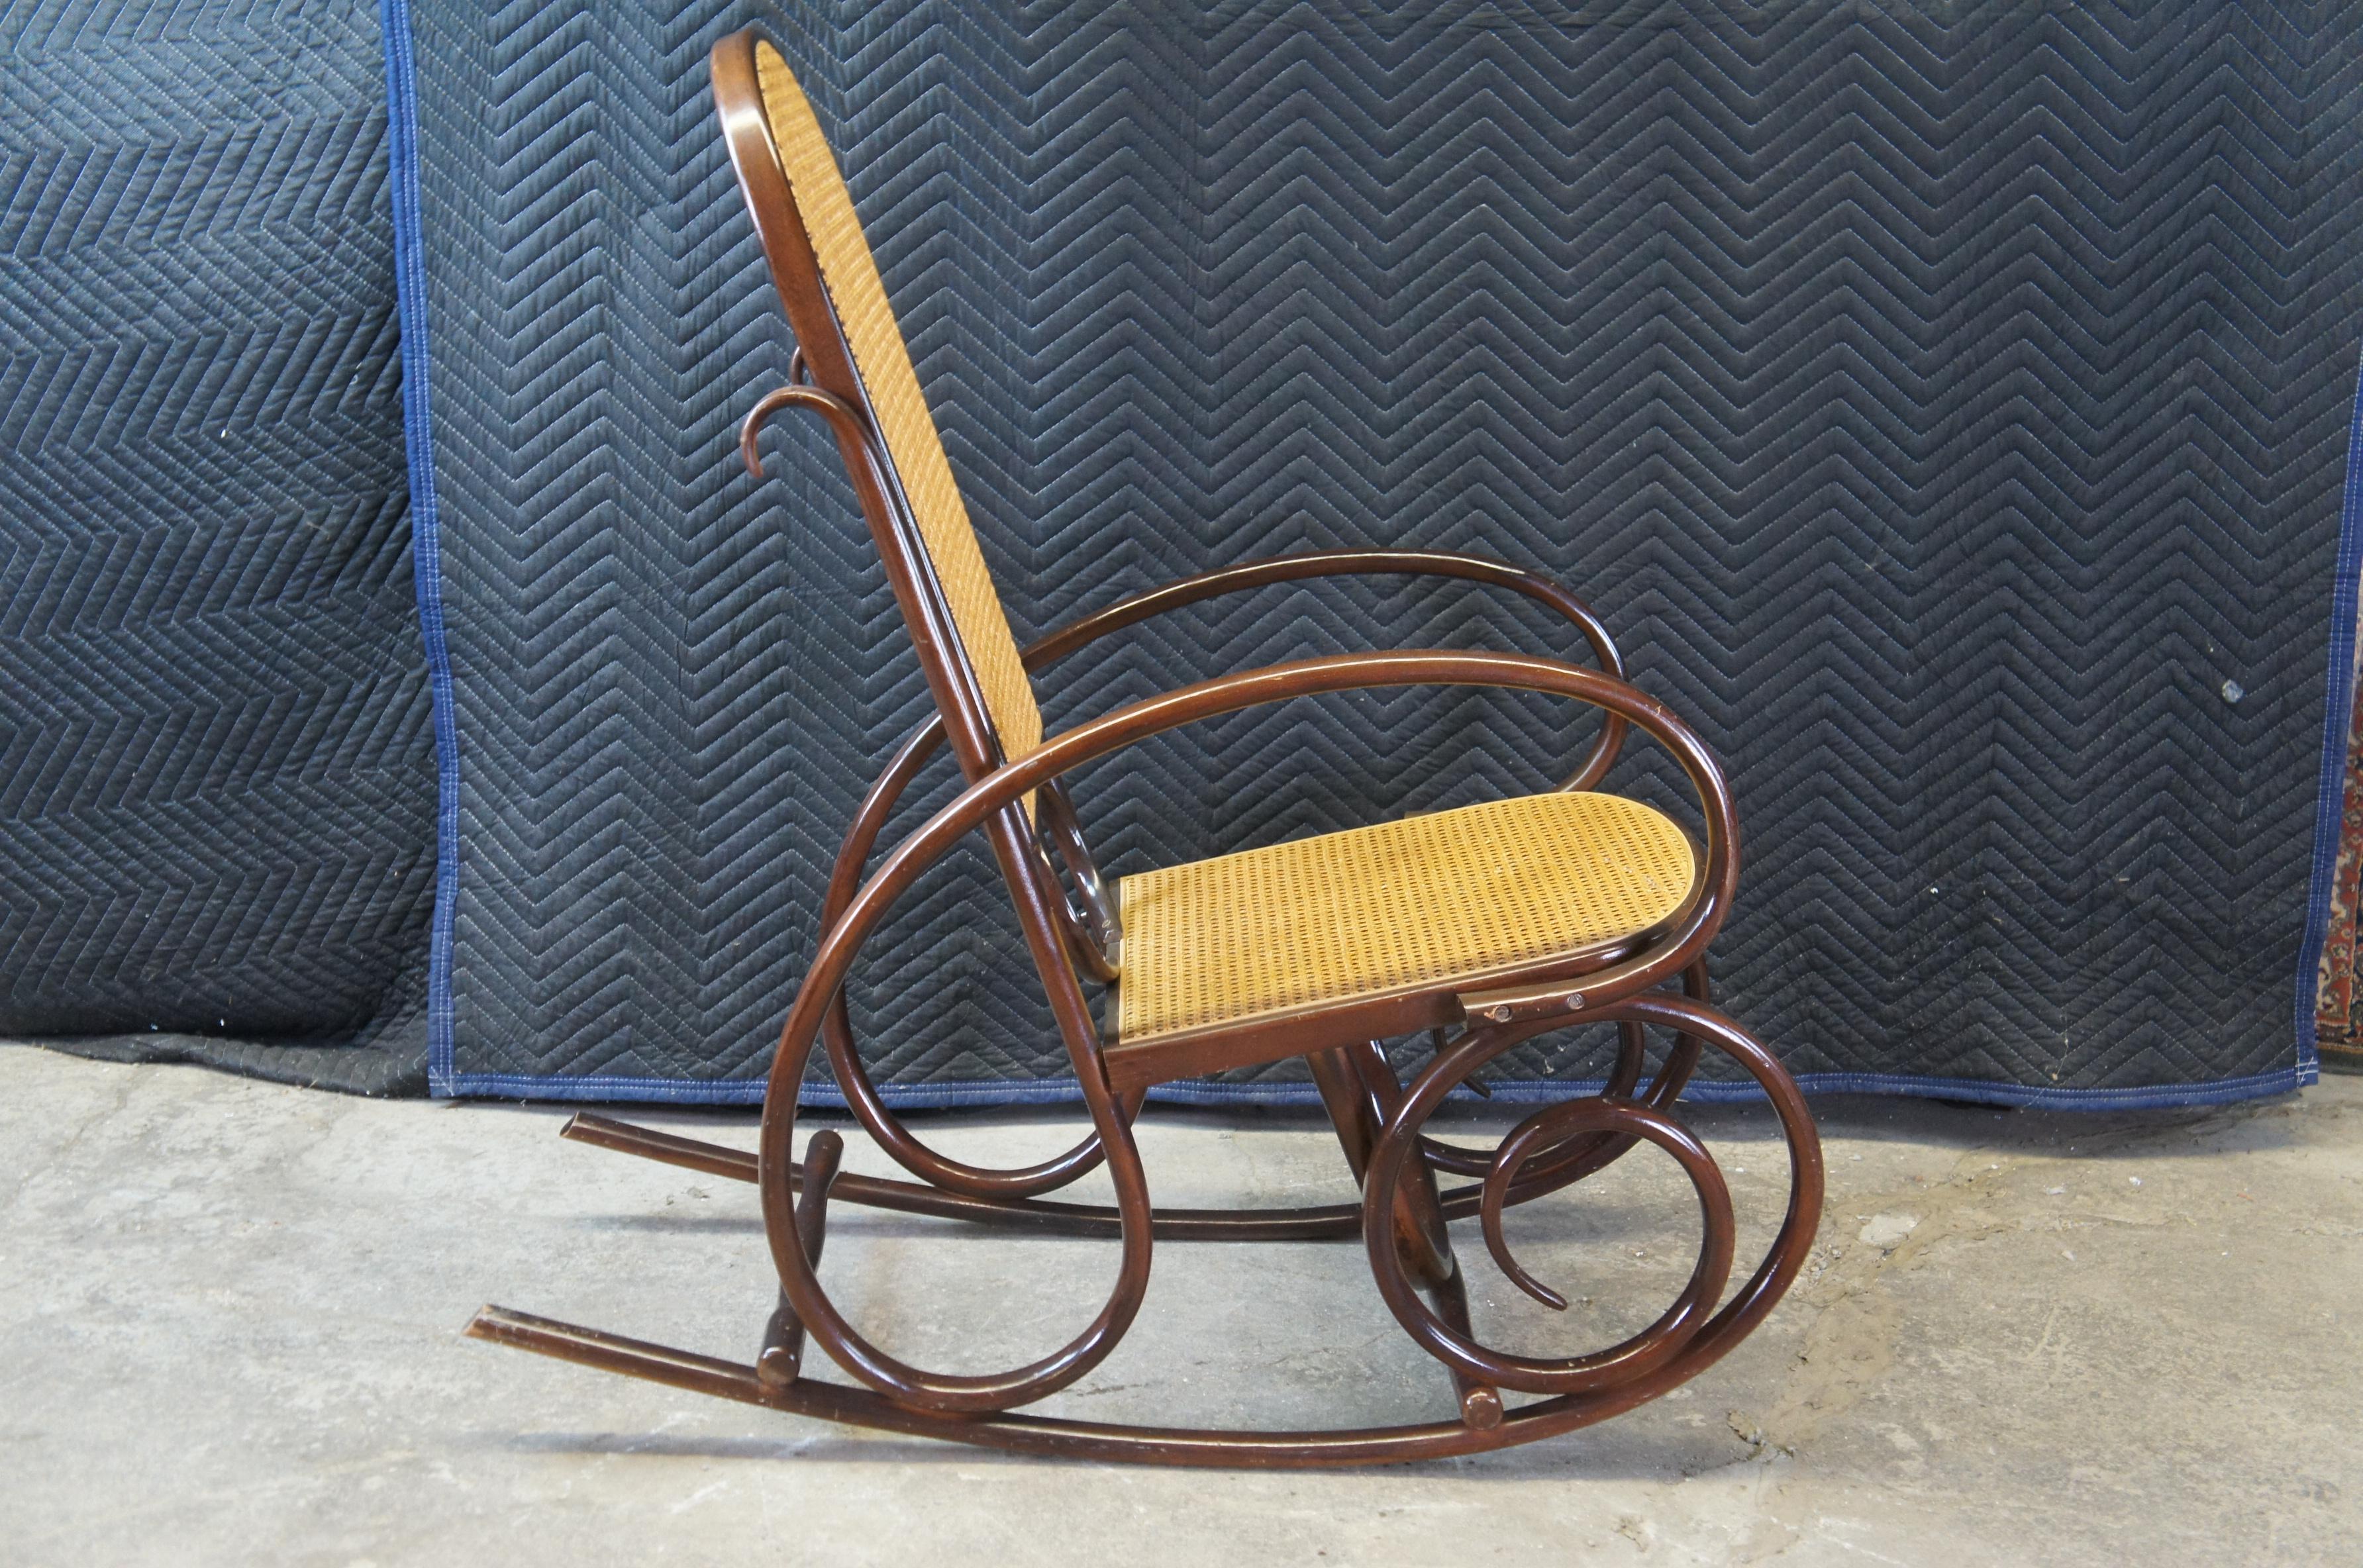 20th Century Iconic Thonet Style Bentwood Rocking Chair Natural Cane Rattan Seat Back Rocker For Sale